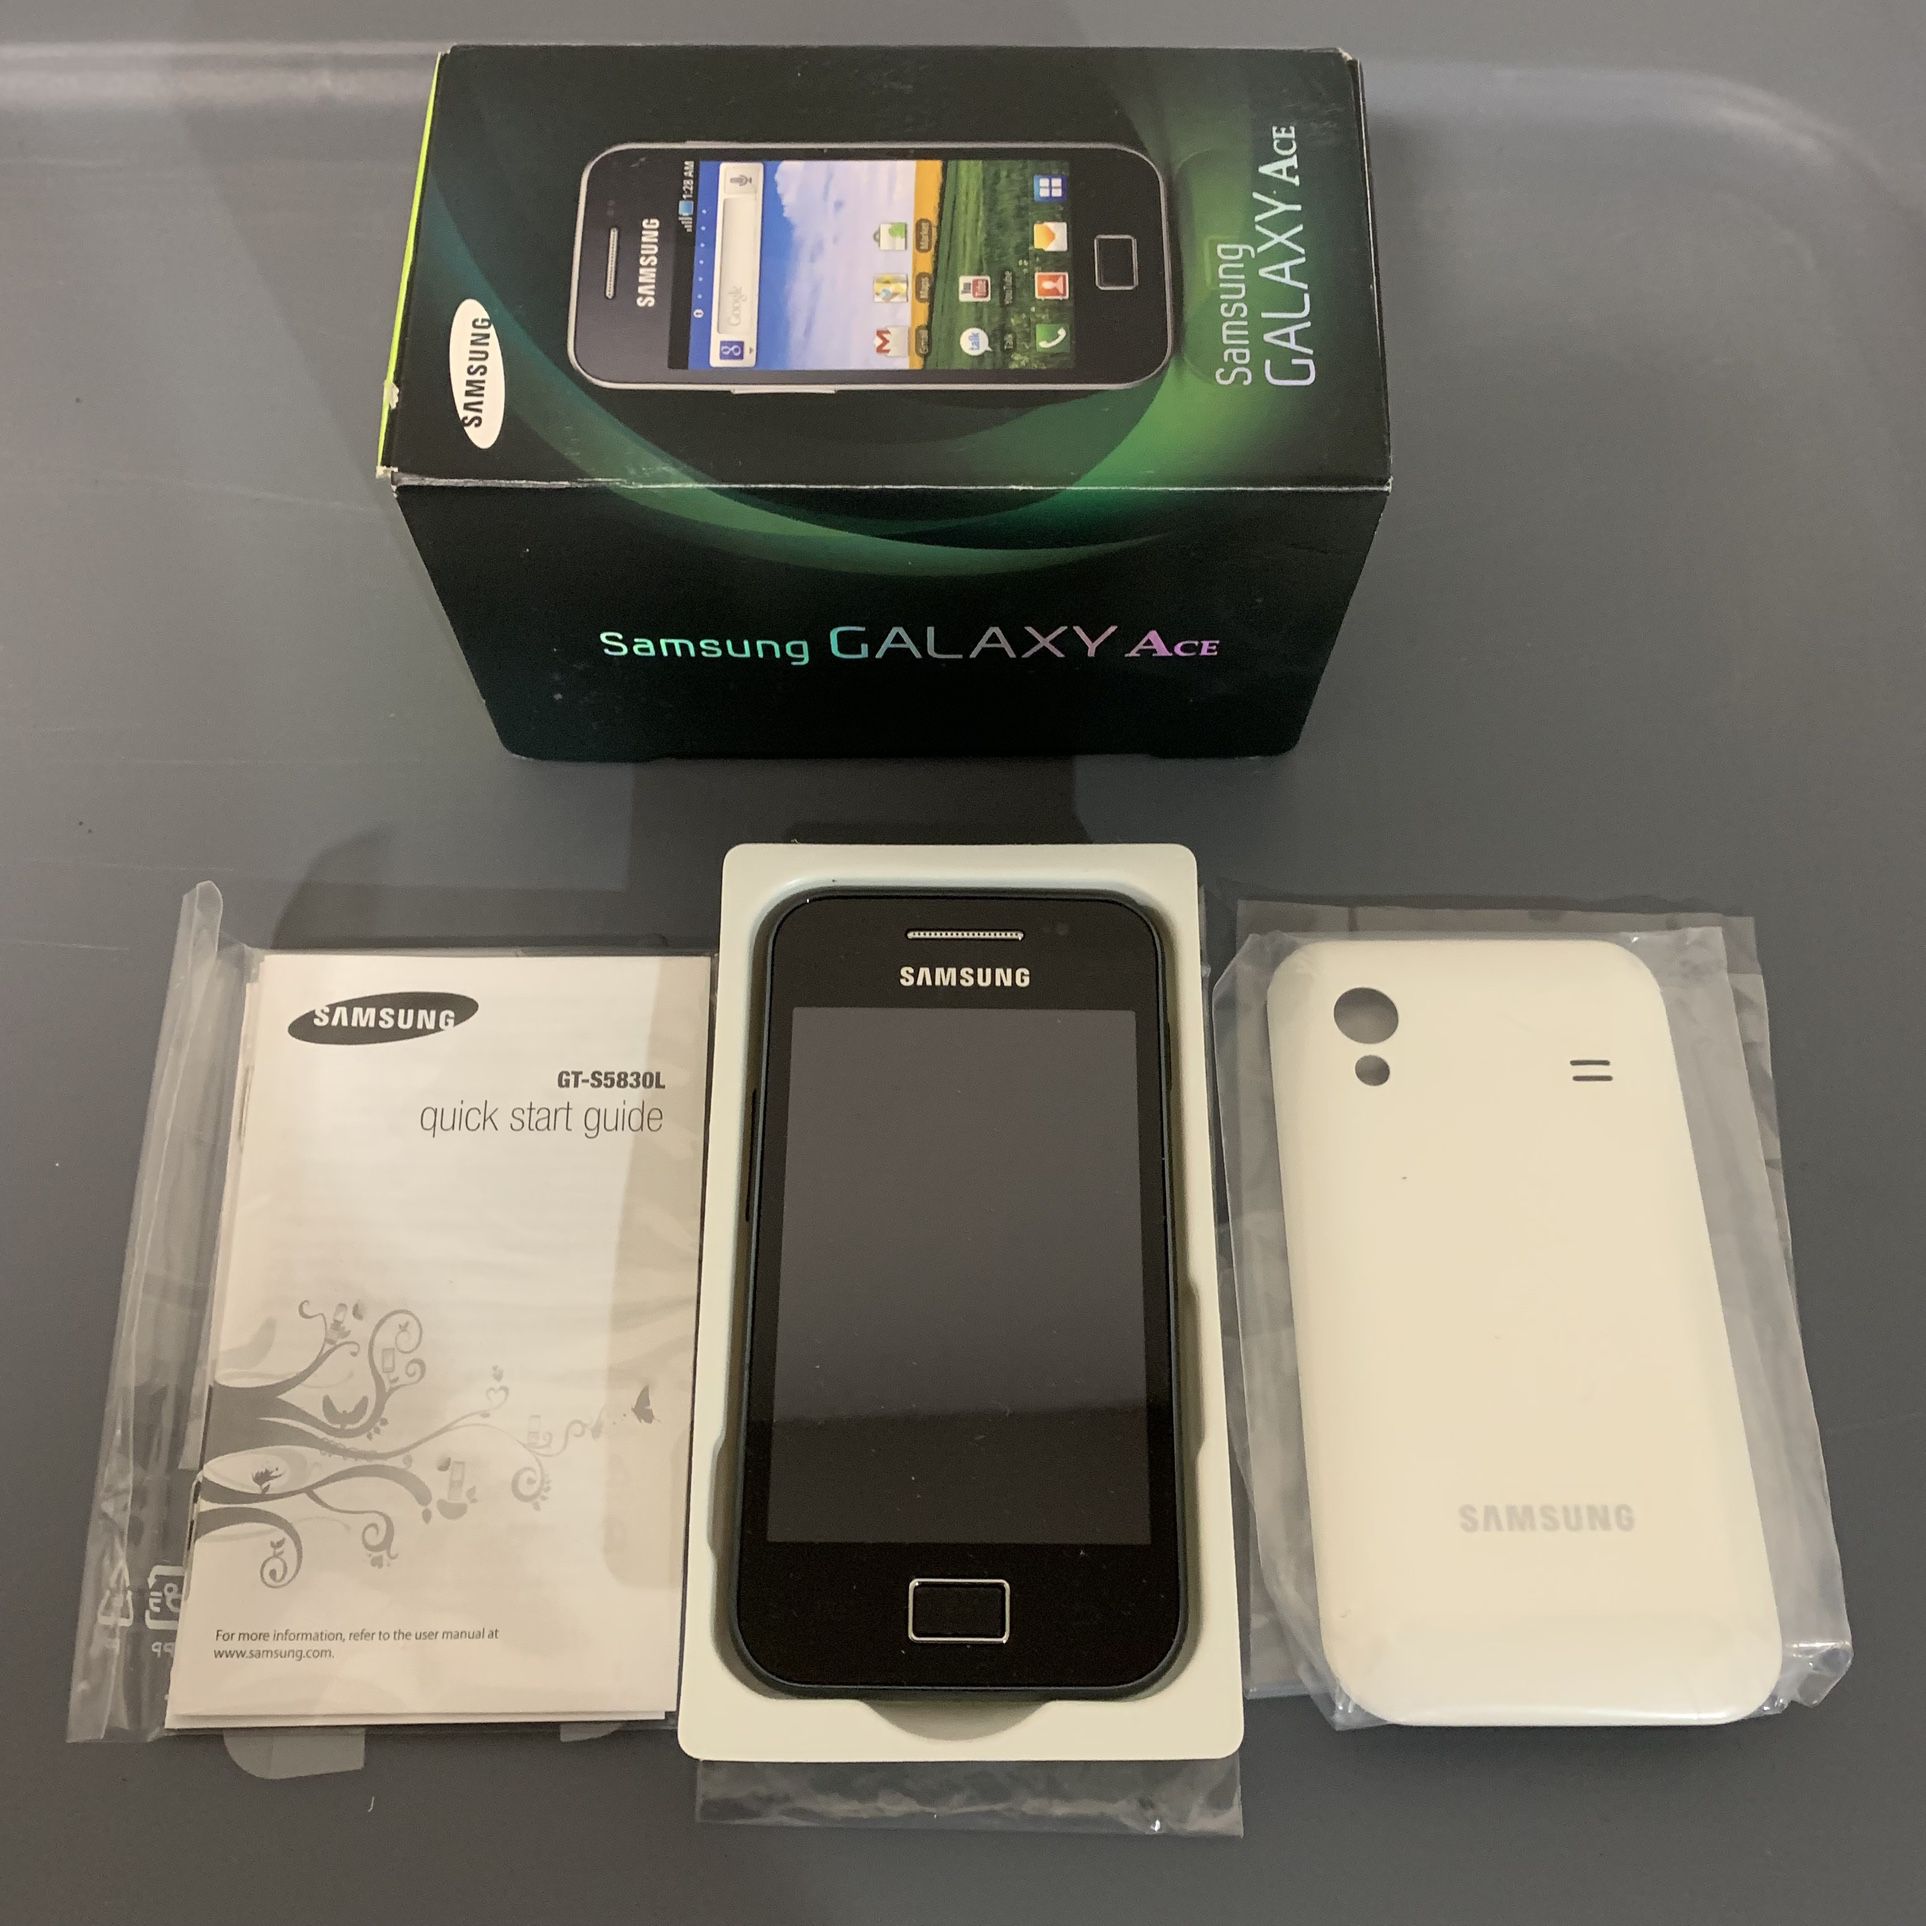 Samsung Galaxy Ace Android Smart Phone